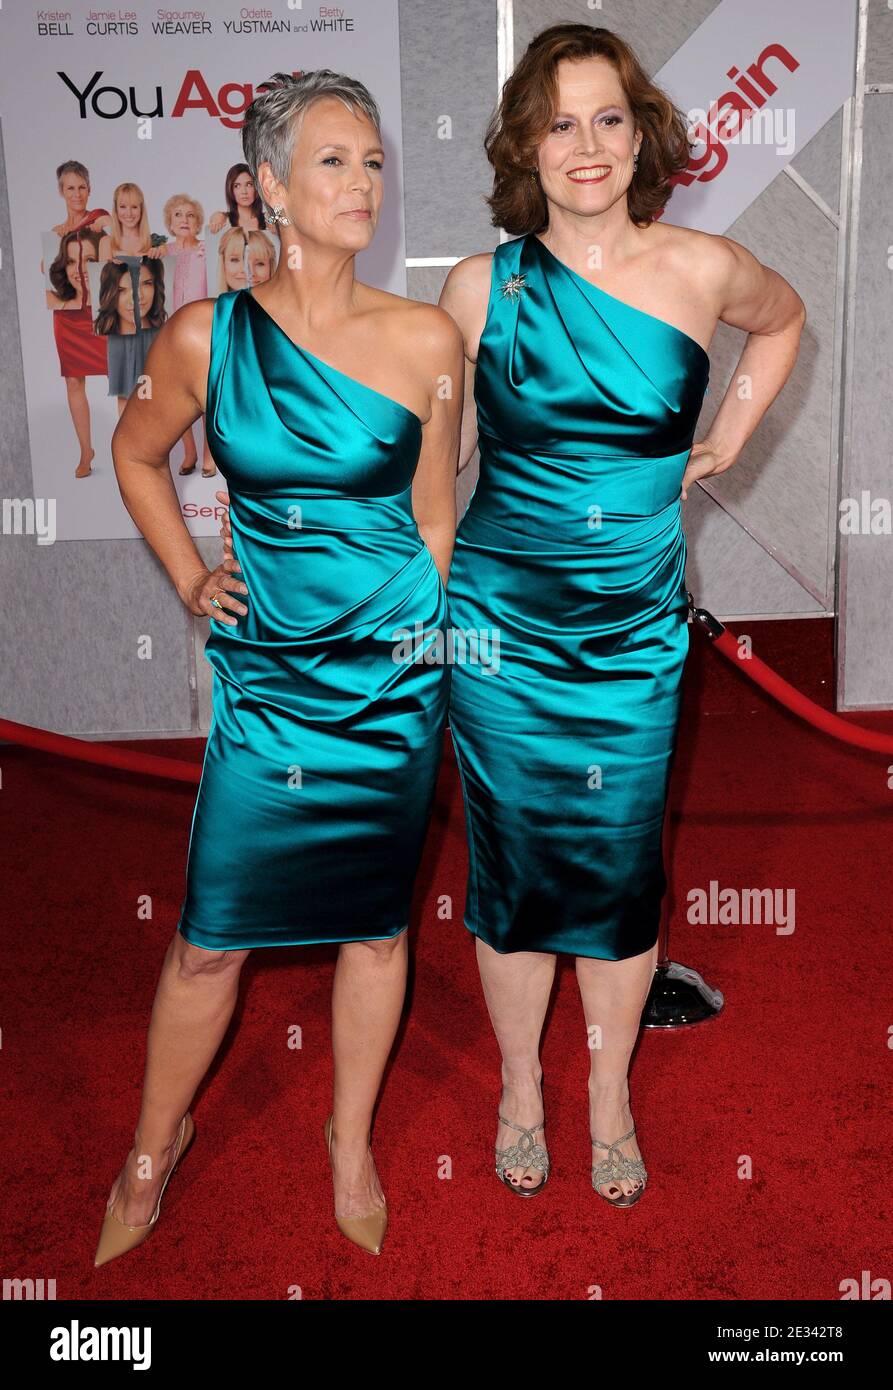 'Sigourney Weaver and Jamie Lee Curtis attend the premiere of Walt Disney's ''You Again'' held at the El Capitan Theatre in Los Angeles, September 22, 2010. Photo by Lionel Hahn/ABACAPRESS.COM (Pictured : Sigourney Weaver, Jamie Lee Curtis)' Stock Photo